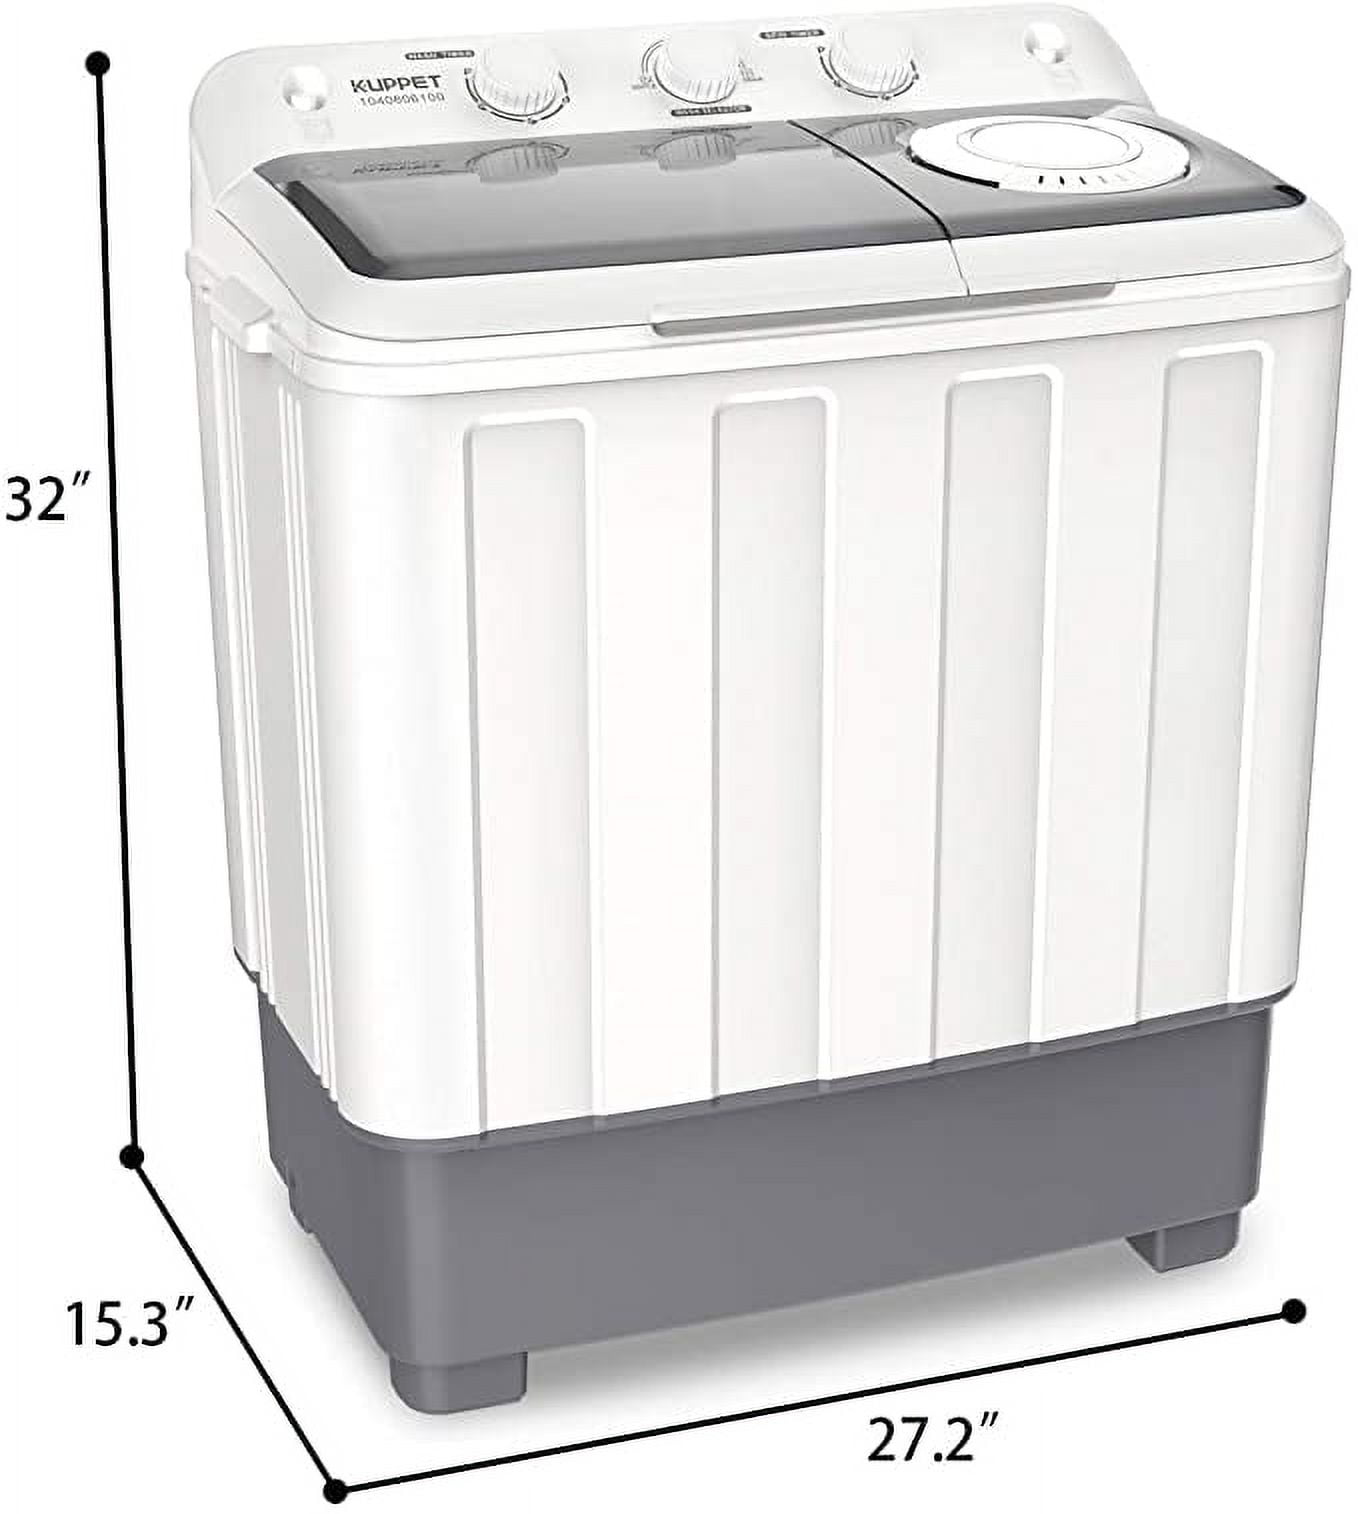 KUPPET Portable Compact Mini Washing Machine,Twin Tub 26.4 lbs Capacity, Washer(17.6lbs)&Spiner(8.8lbs),Built-in Drain Pump,Semi-Automatic，For  Dorms, Camping, Apartments, RV's, and more(White&Gray) 